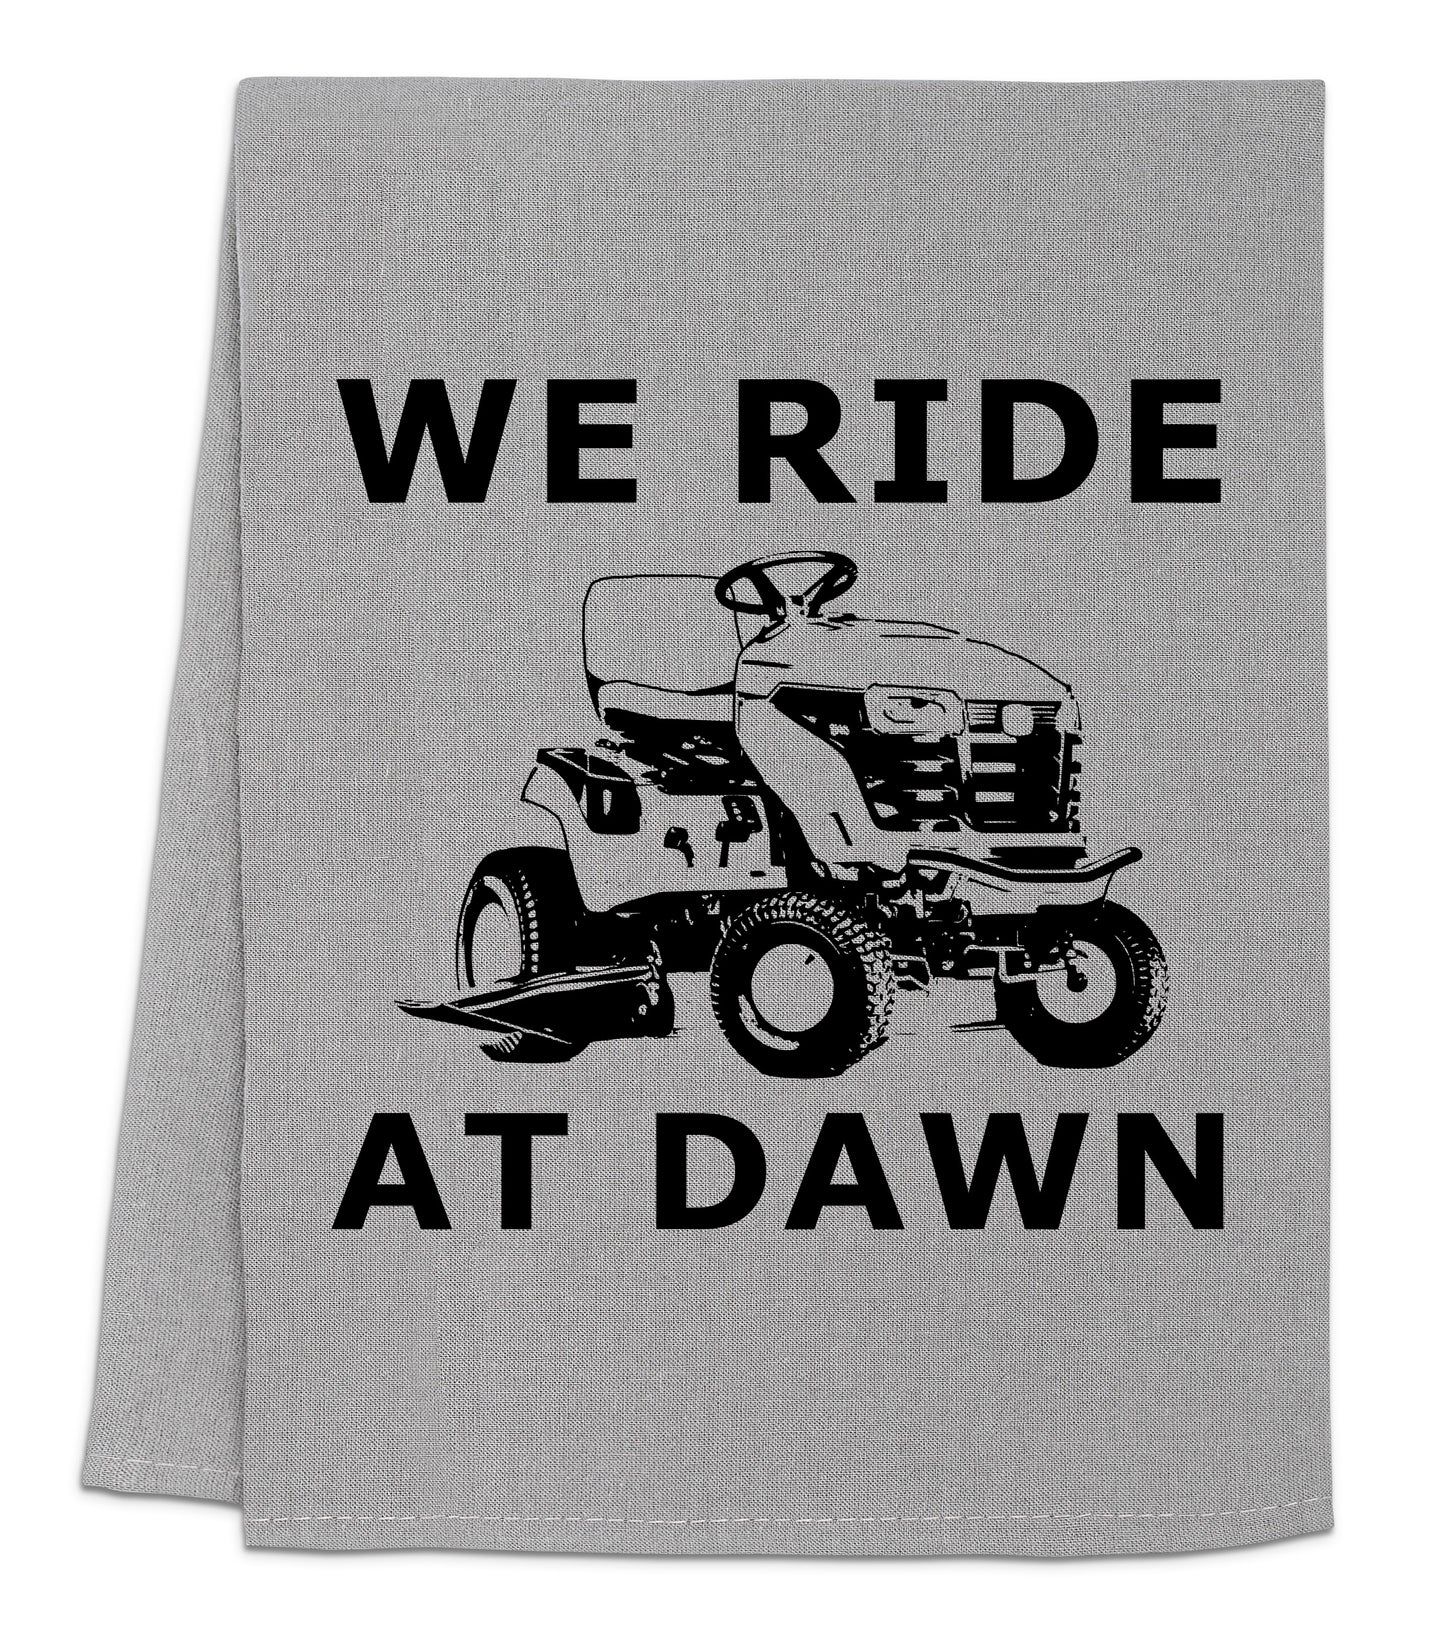 a towel that says we ride at dawn